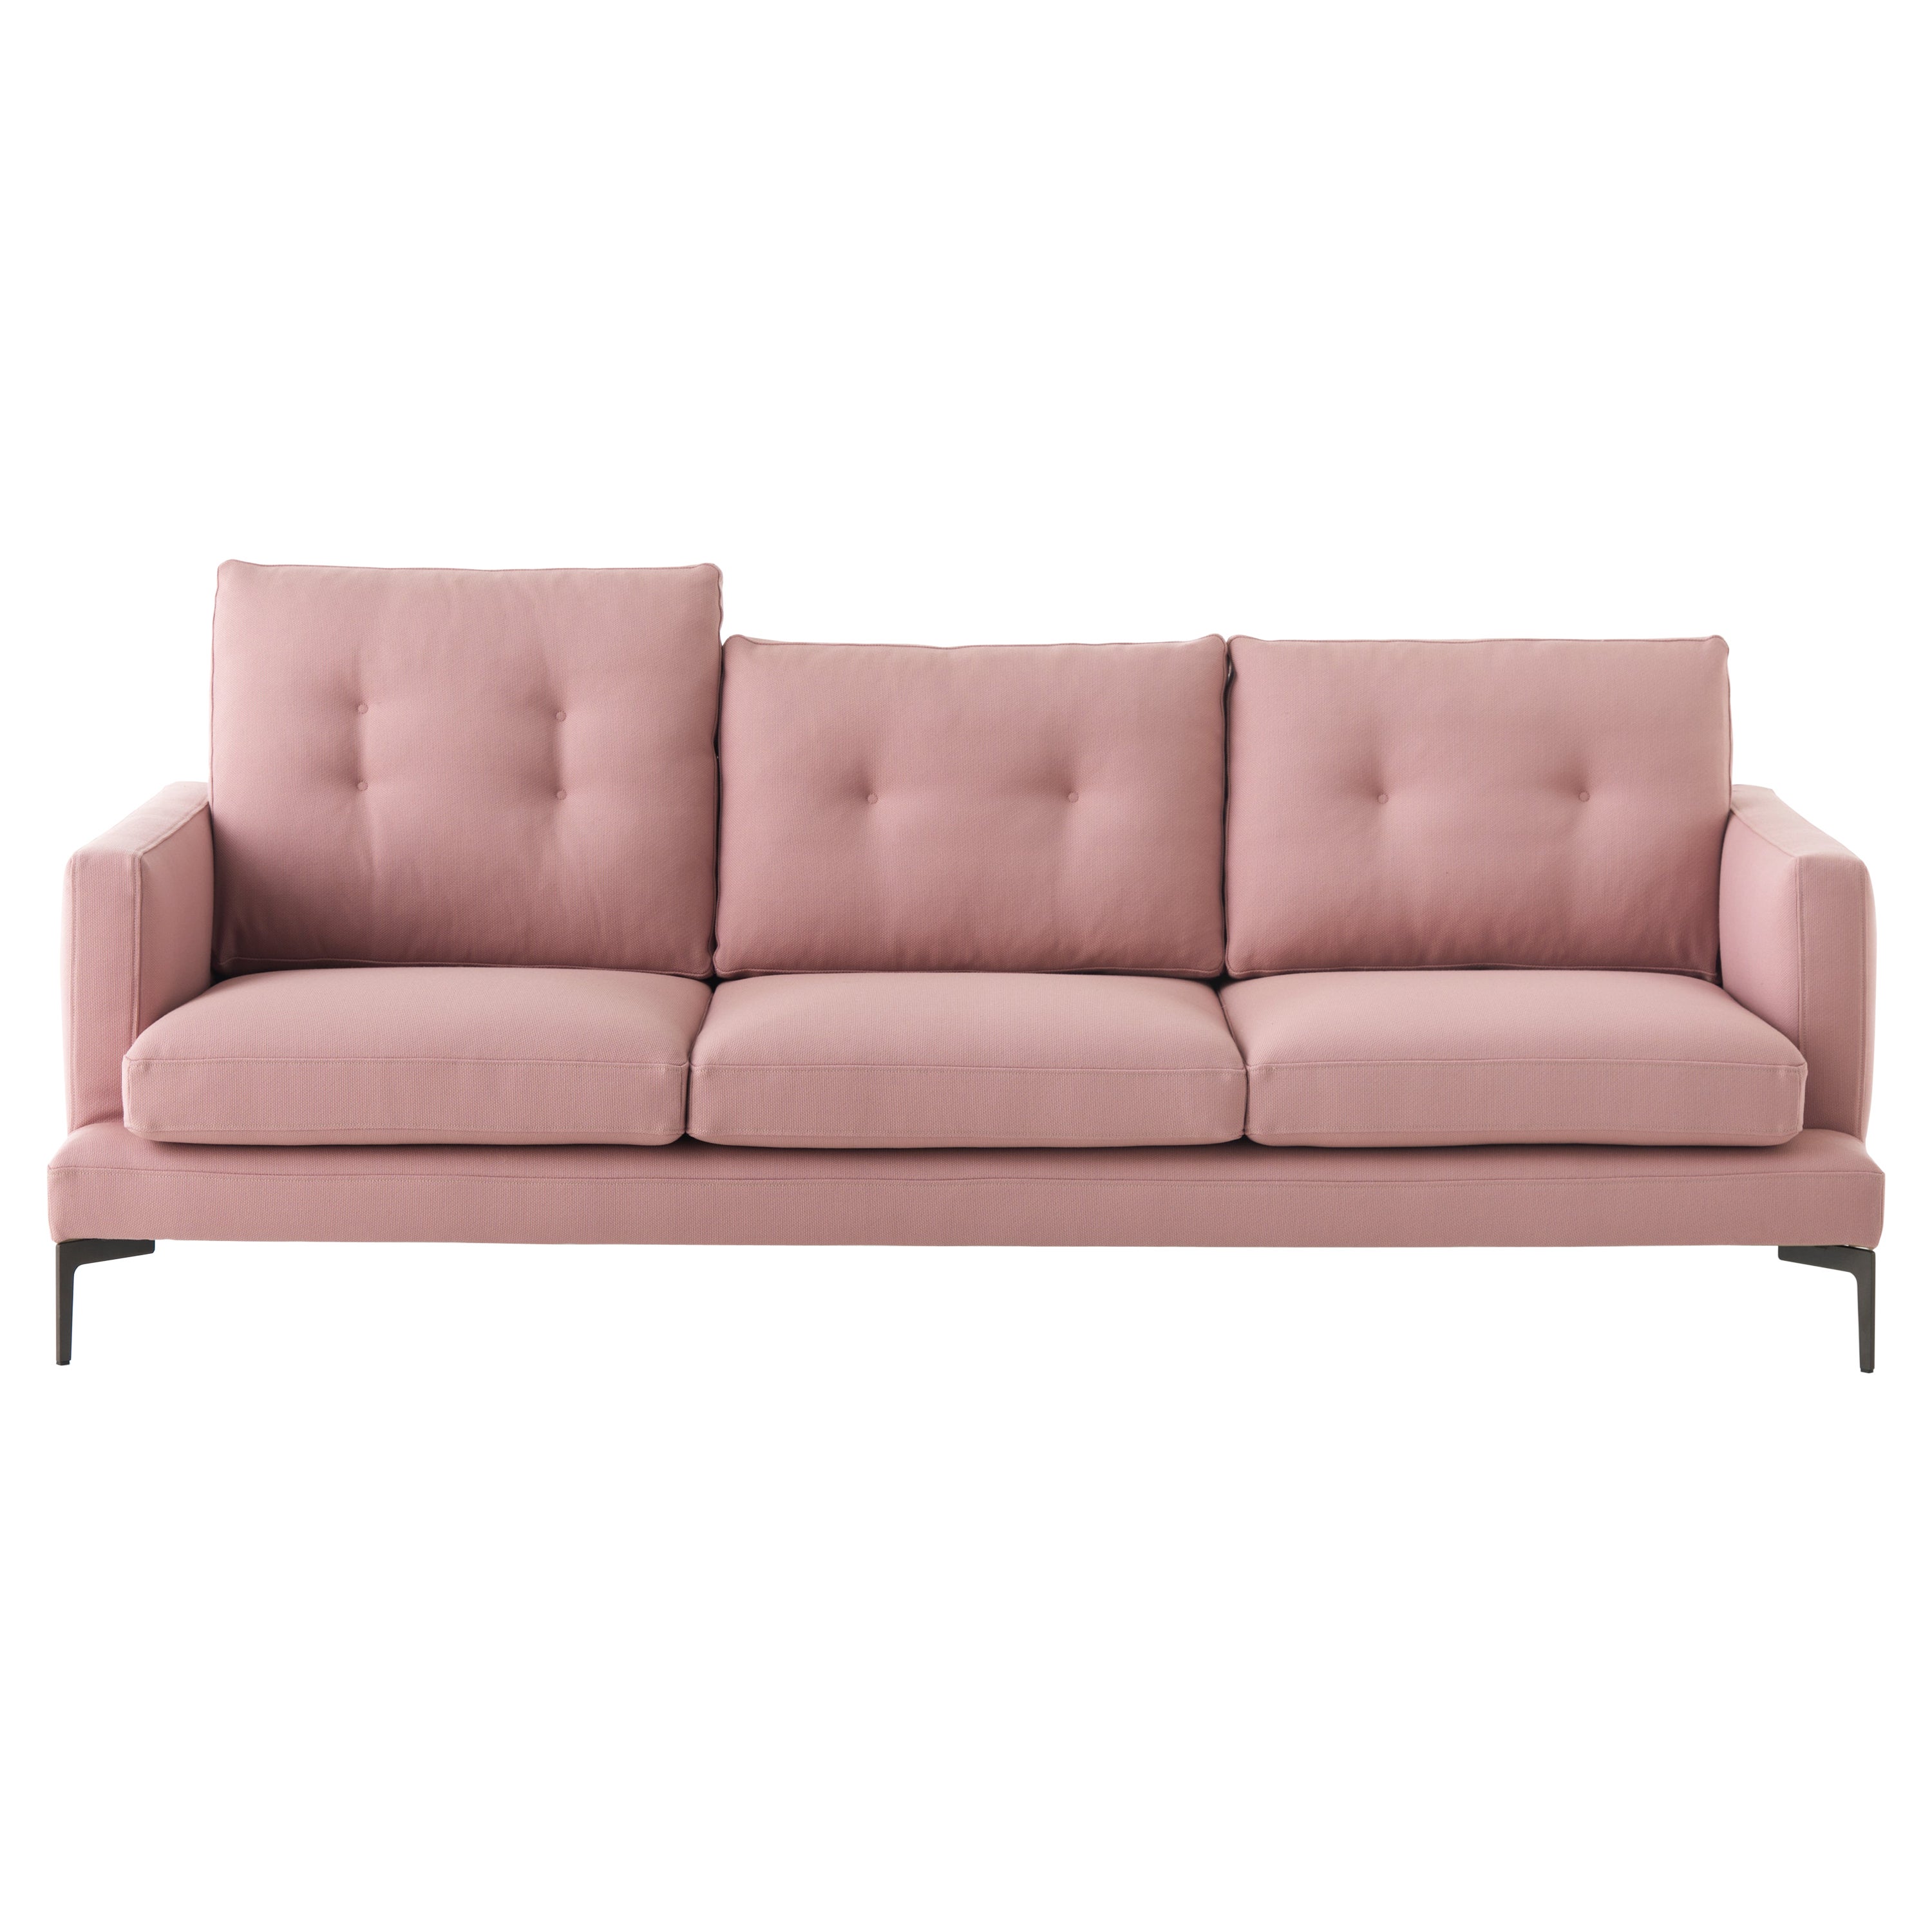 Essentiel 3-Seat 220 High Cushion Sofa in Smile Pink Upholstery by Sergio Bicego